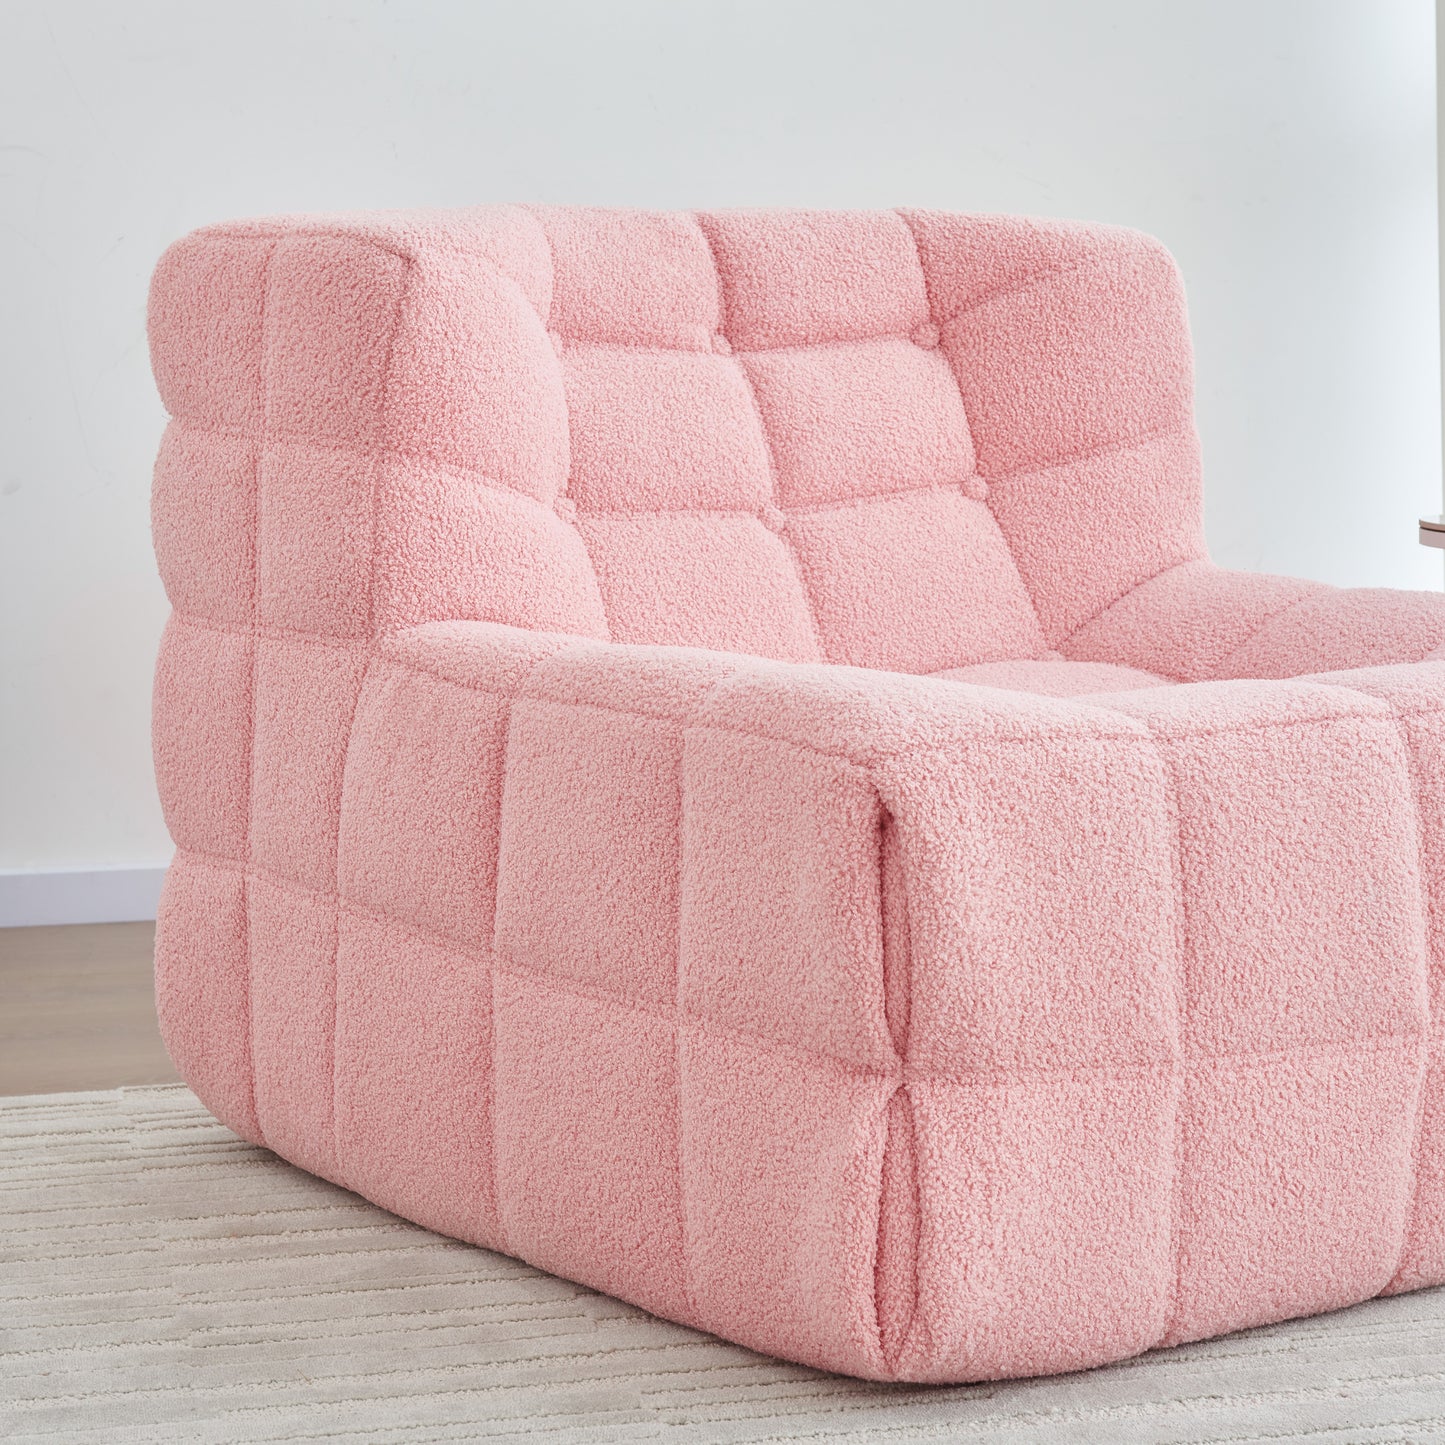 Bean Bag Chair Sofa, Sherpa Beanbag Chair Couch for Adults, Armless Tufted Bean Bag Lounge Soft Comfy Chair for Bedroom, Living Room or Balcony(Pink)